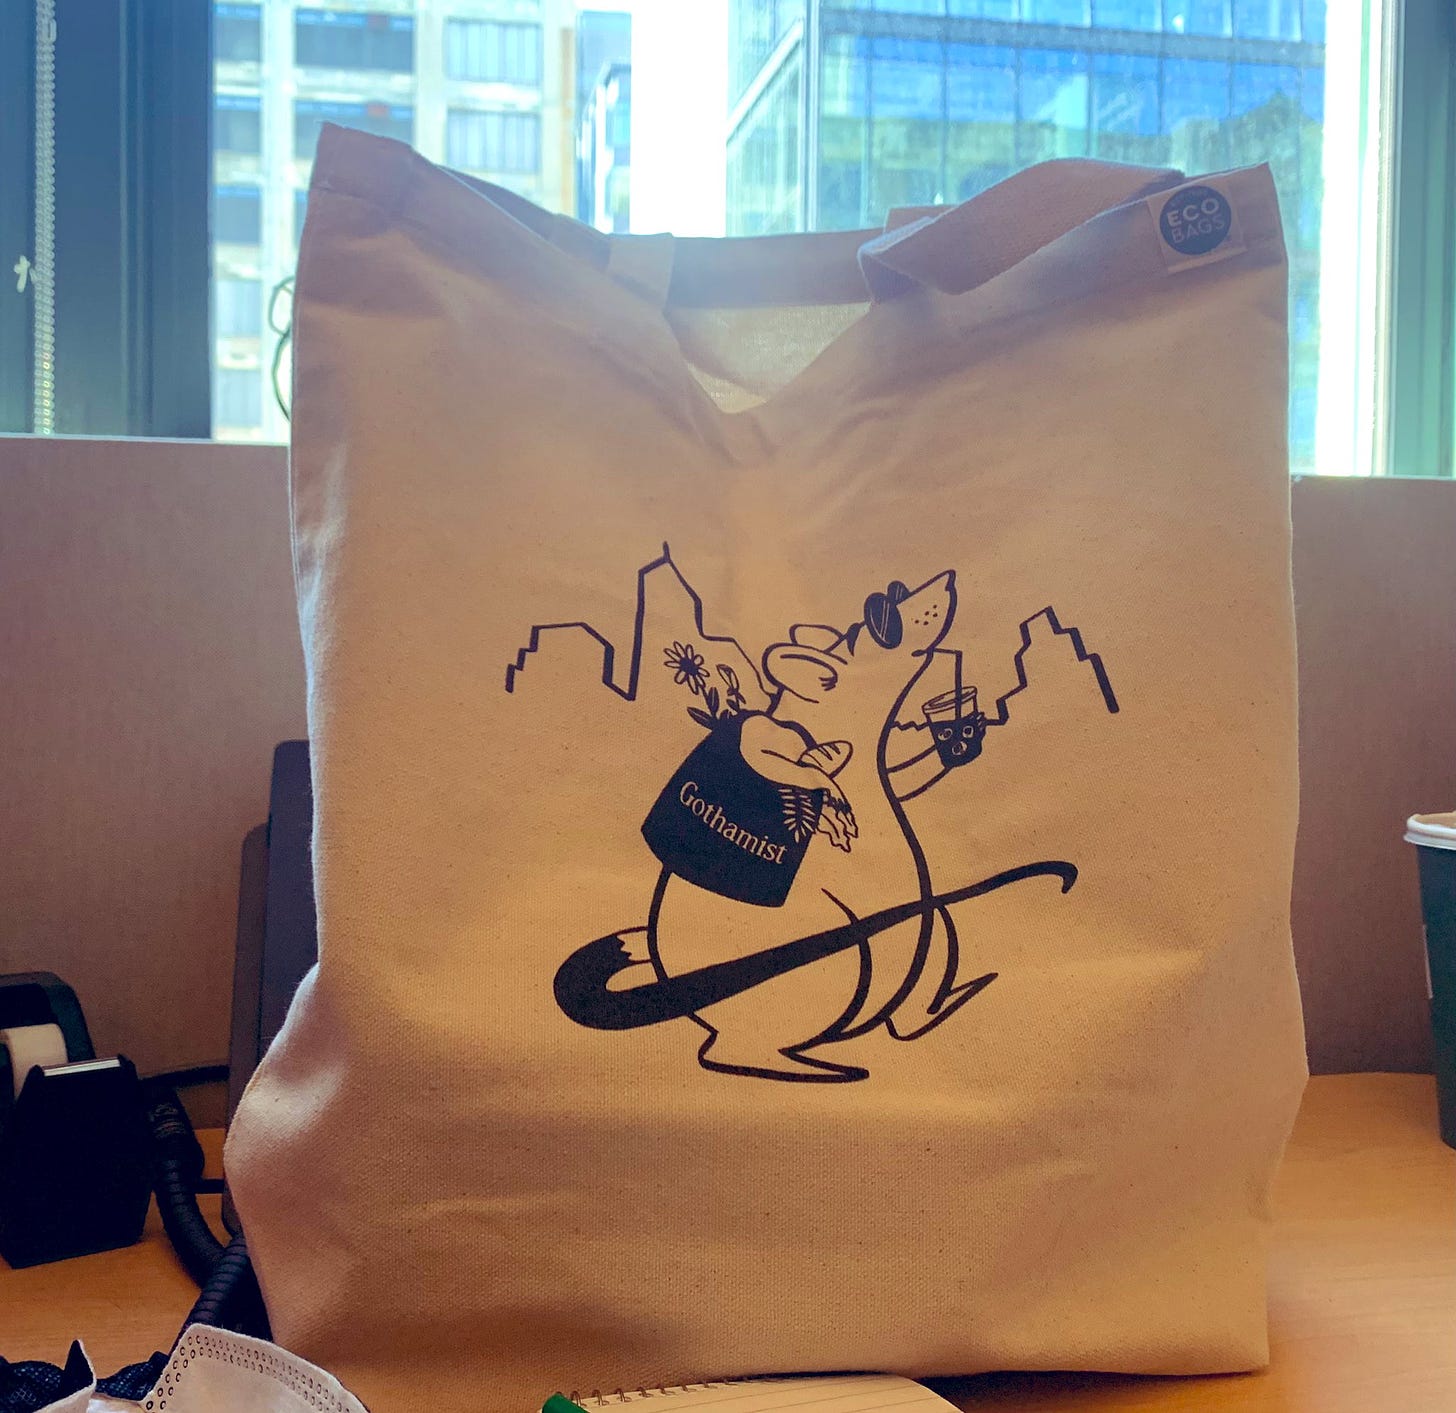 Jordan Pascale on X: ".@DCist rat-infested Popeyes merch/tote bags when?  https://t.co/ZngRS34h0A" / X